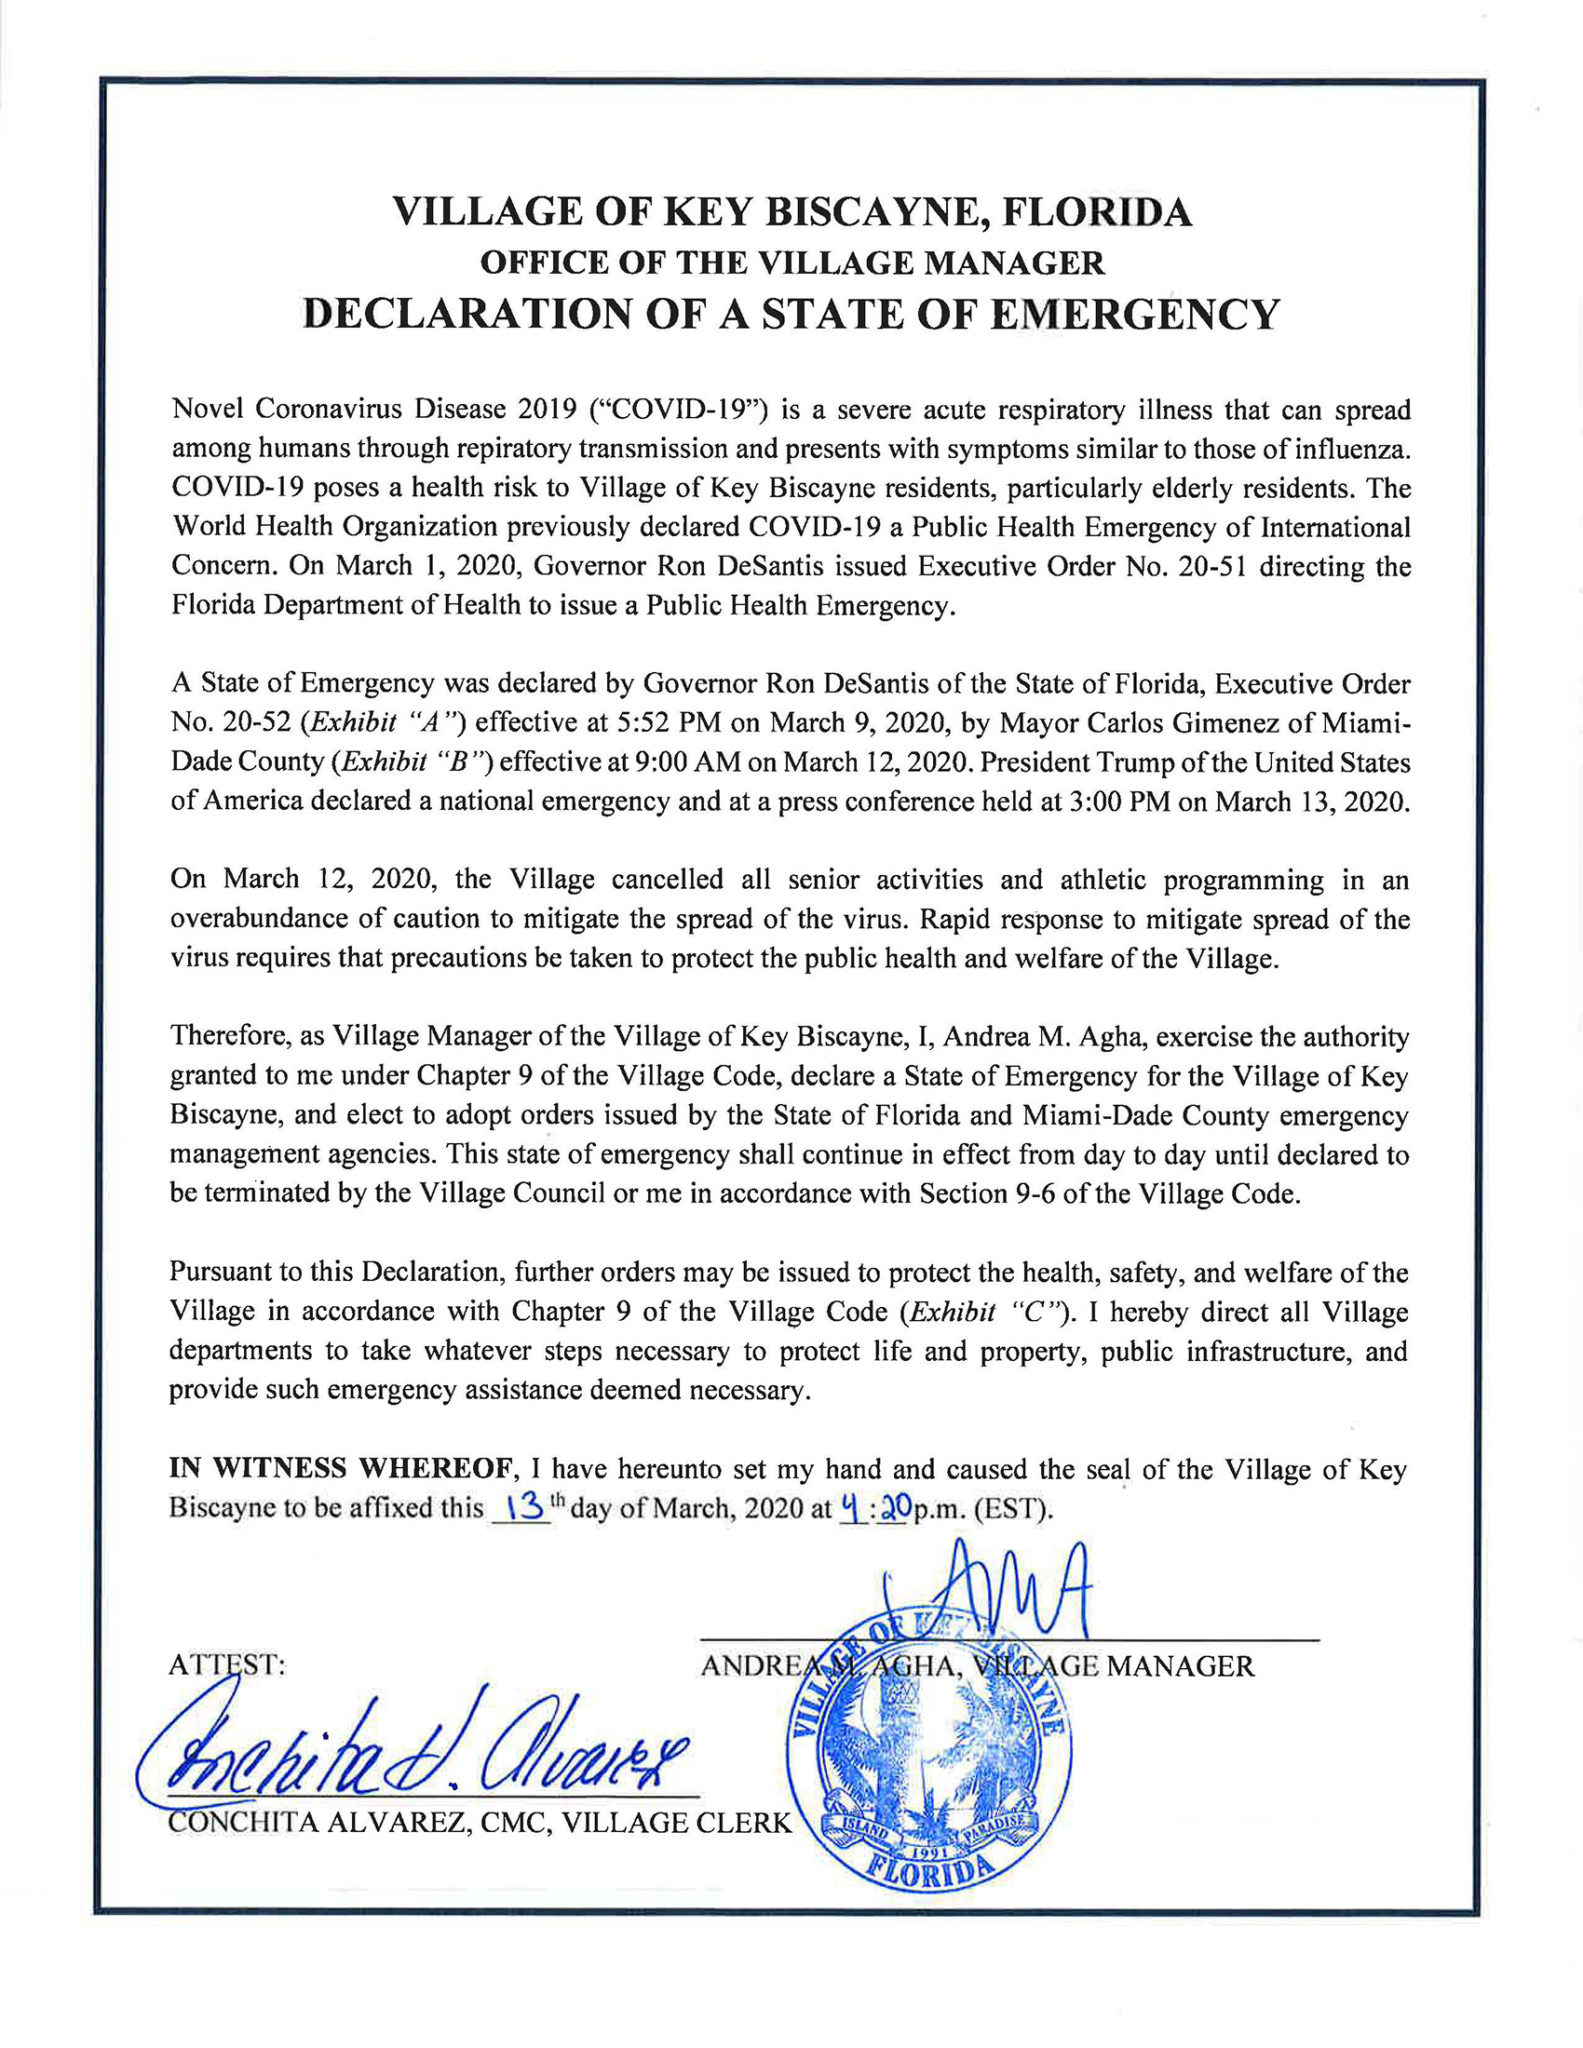 DECLARATION OF A STATE OF EMERGENCY OFFICE OF THE VILLAGE MANAGER Key